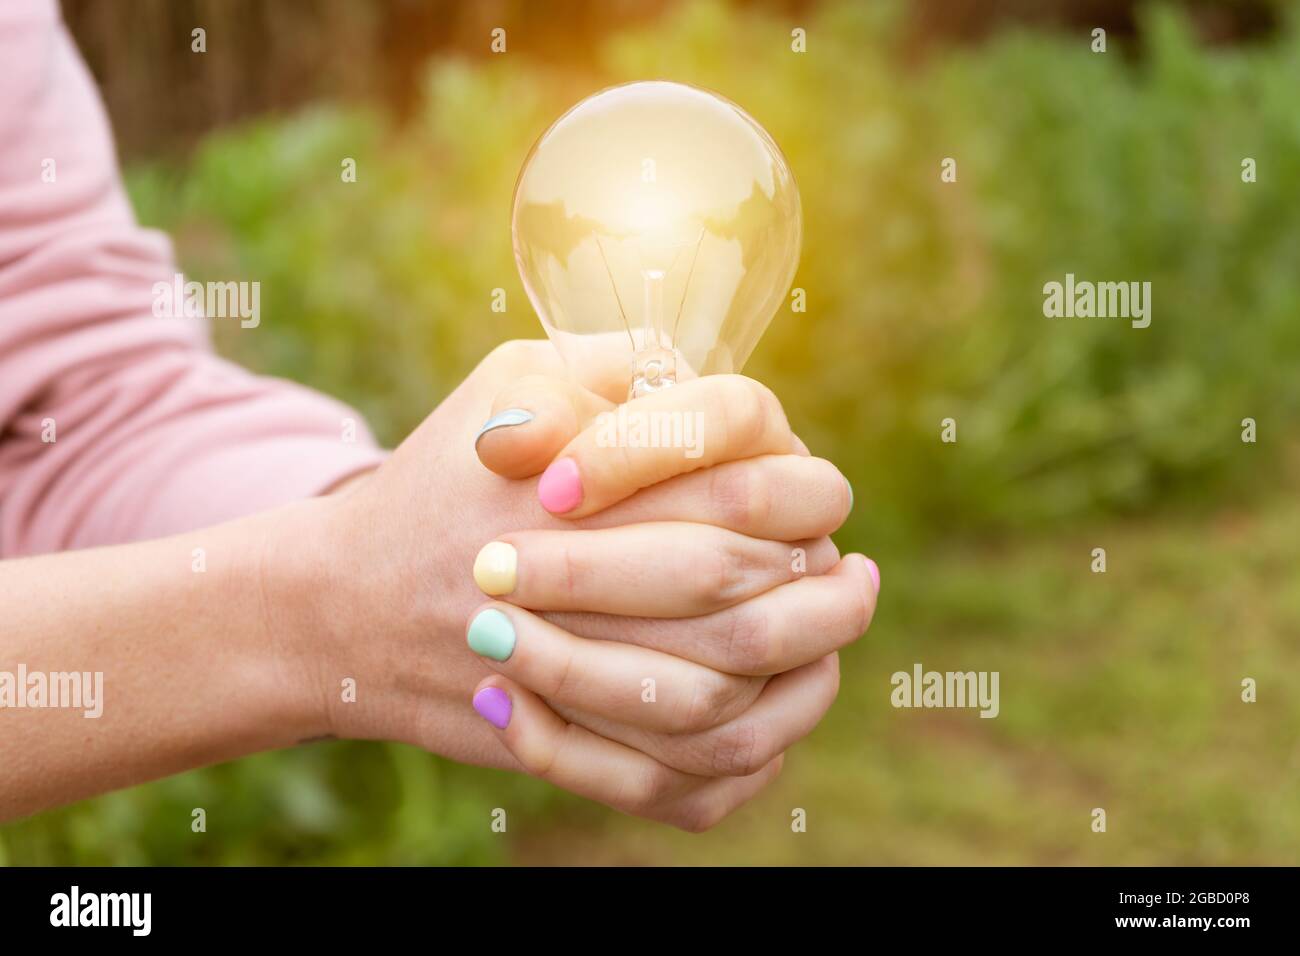 Energy and environment eco concept.Woman hands holding glowing light bulb in nature background. Stock Photo